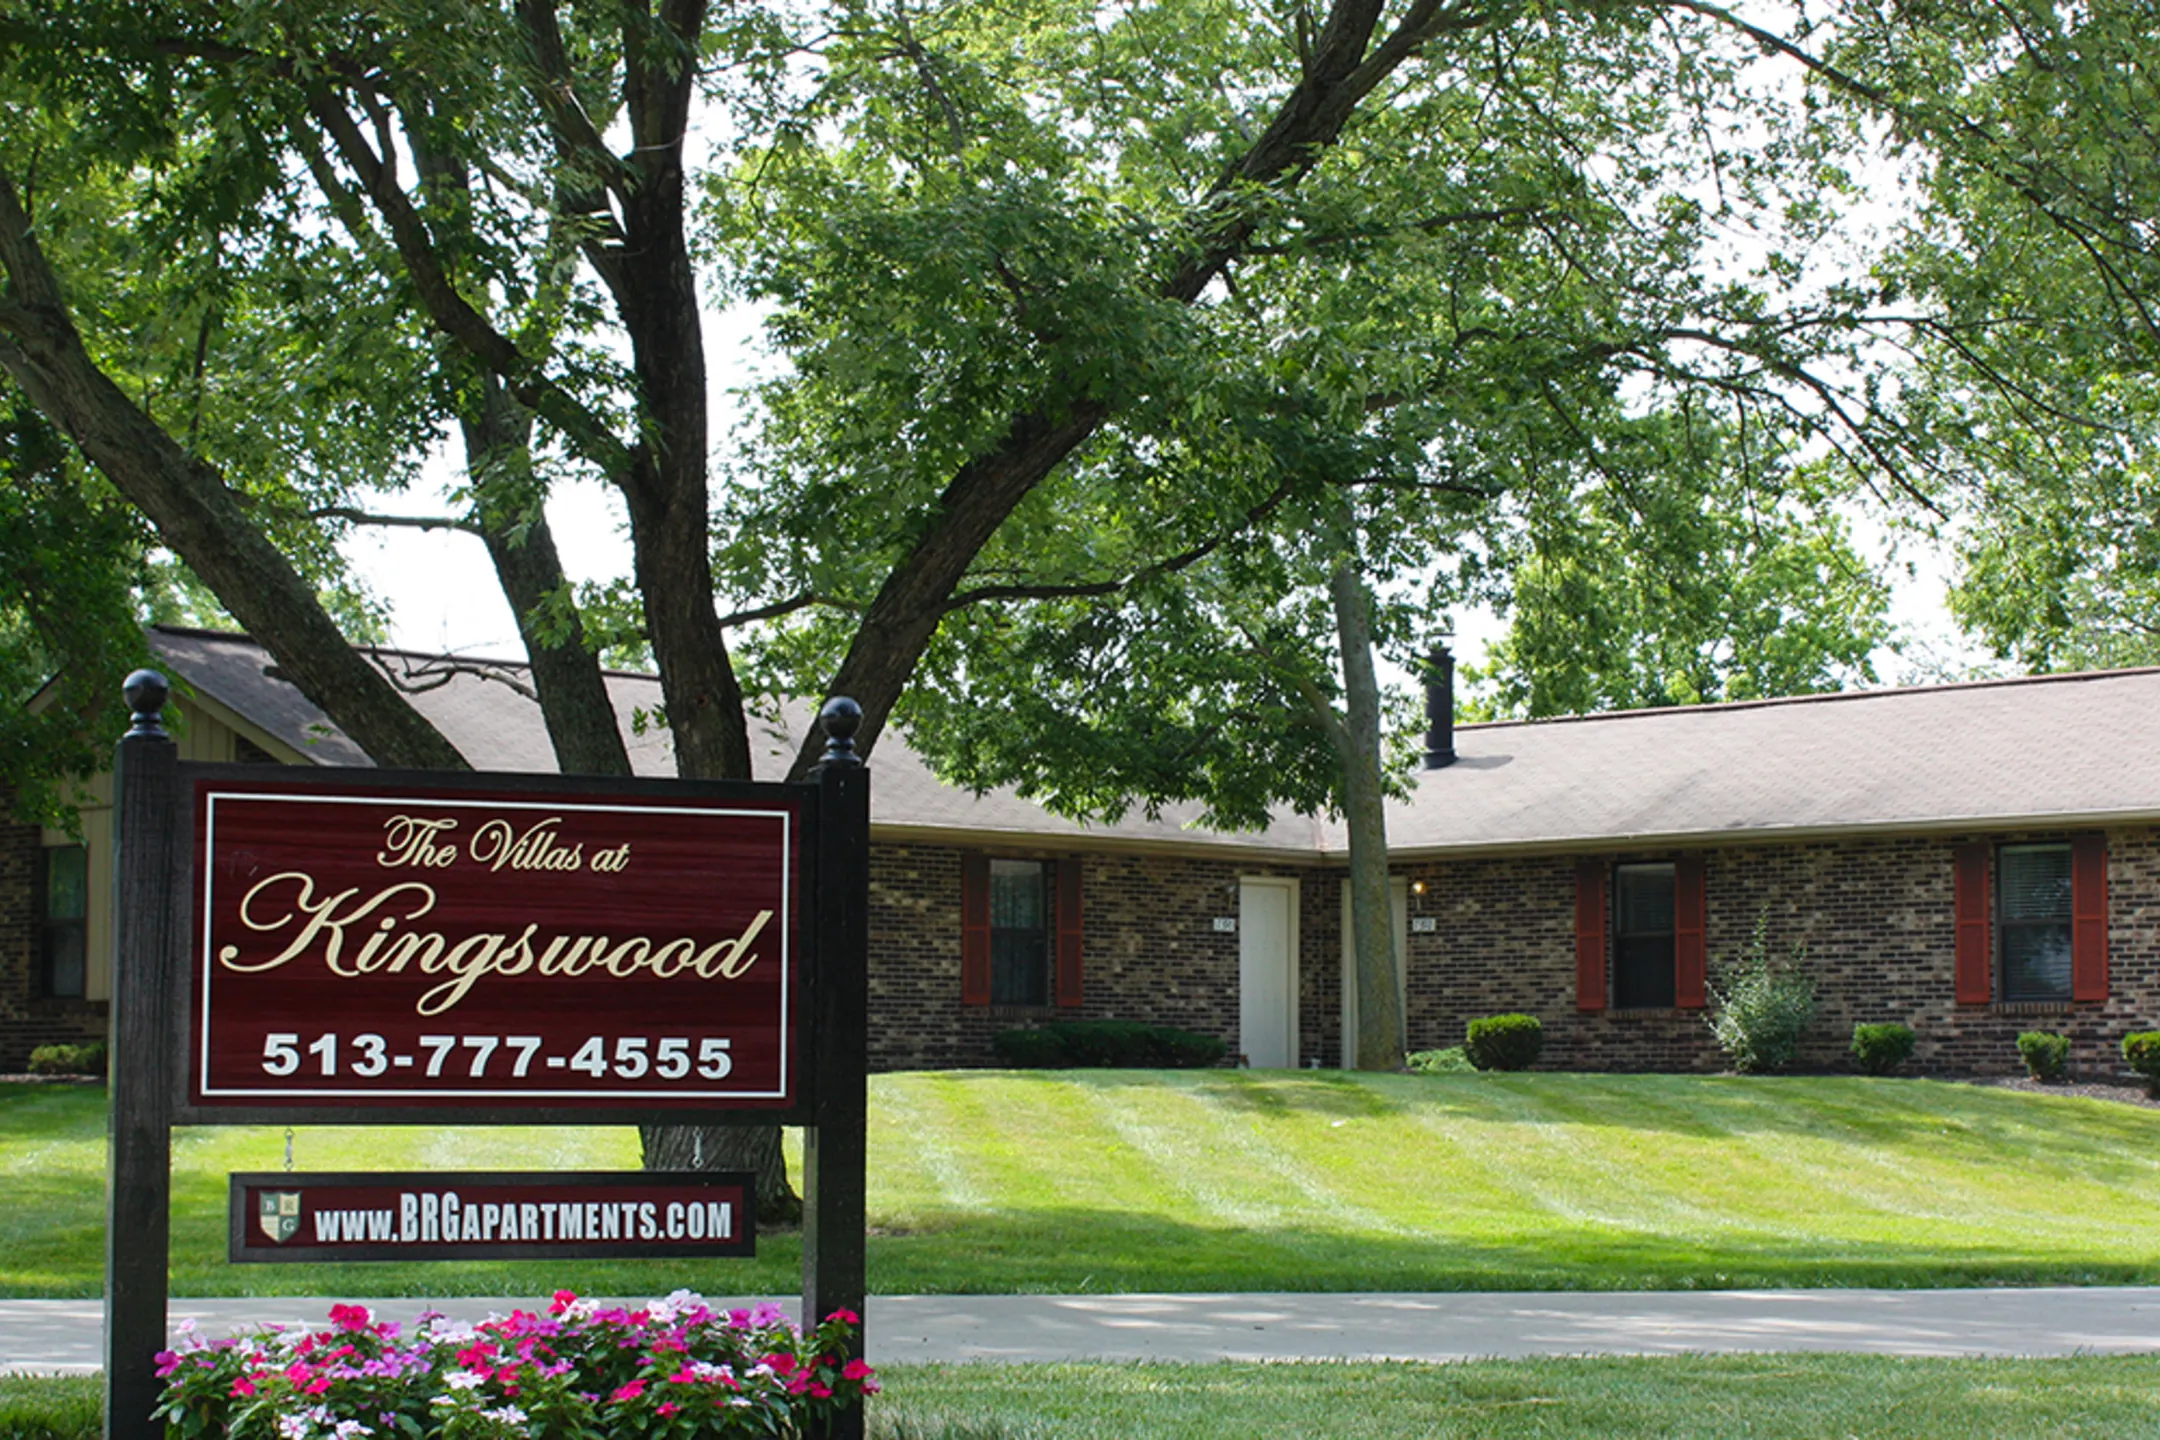 Community Signage - The Villas at Kingswood - West Chester, OH